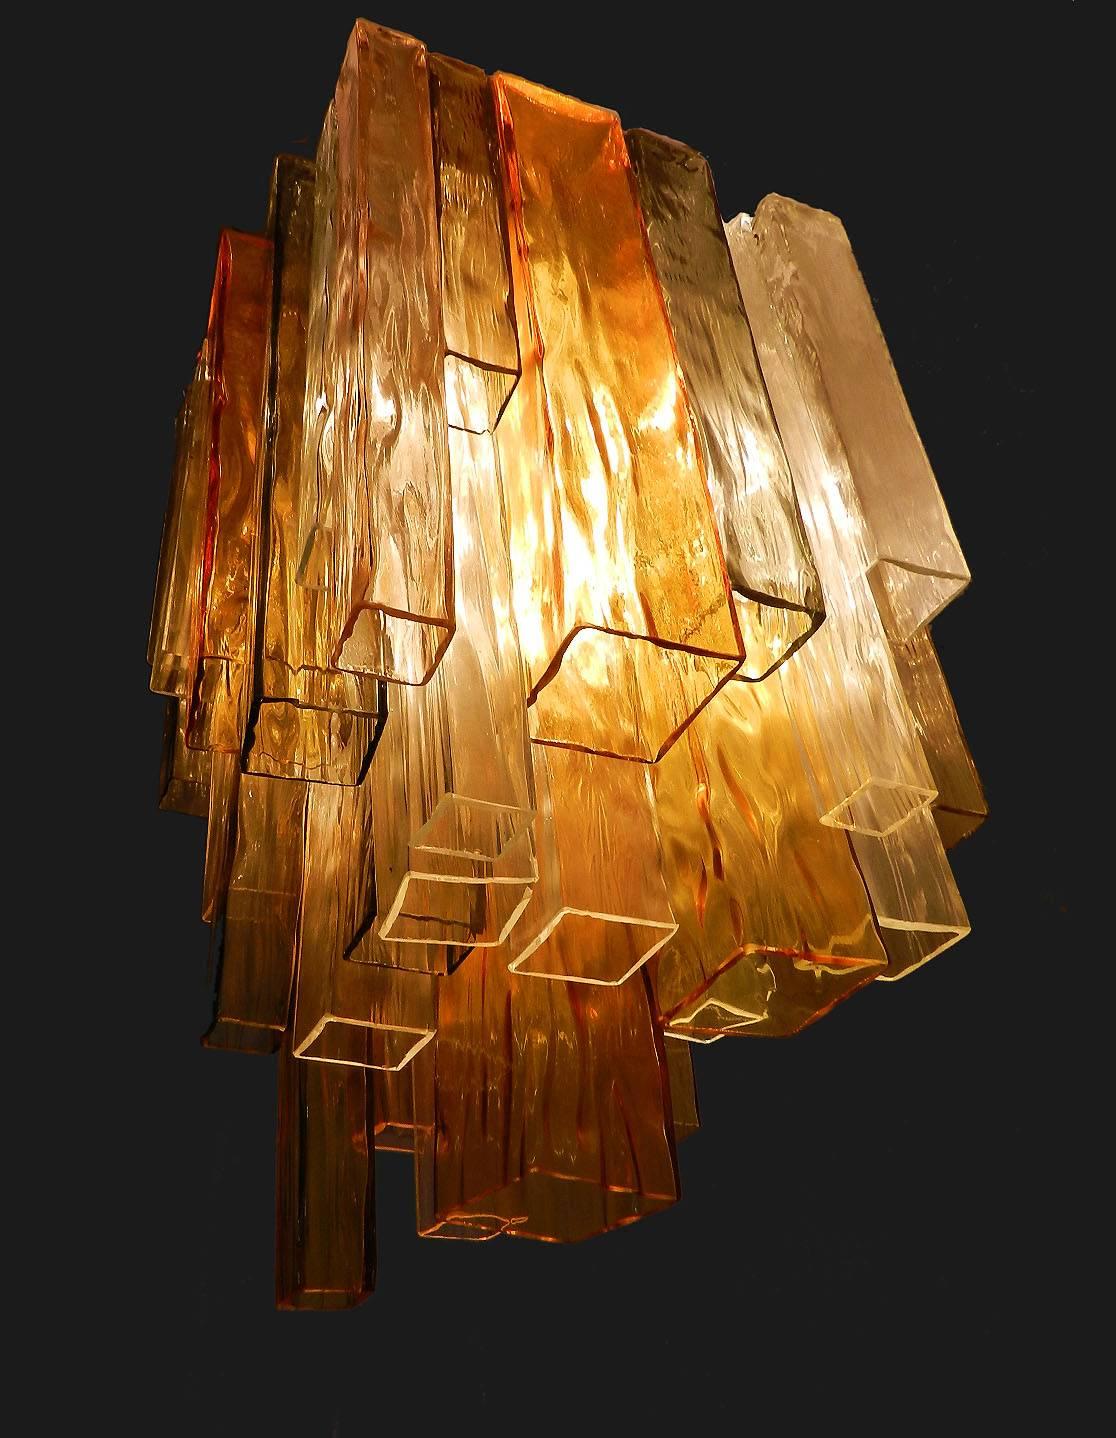 Barovier & Toso Murano Venini rare four-color glass chandelier stunning and impressive
With its original label on the top of flush mount, Barovier and Toso
We infomed that this came from an Hotel in Monaco that was re furbished
Flush mount ceiling